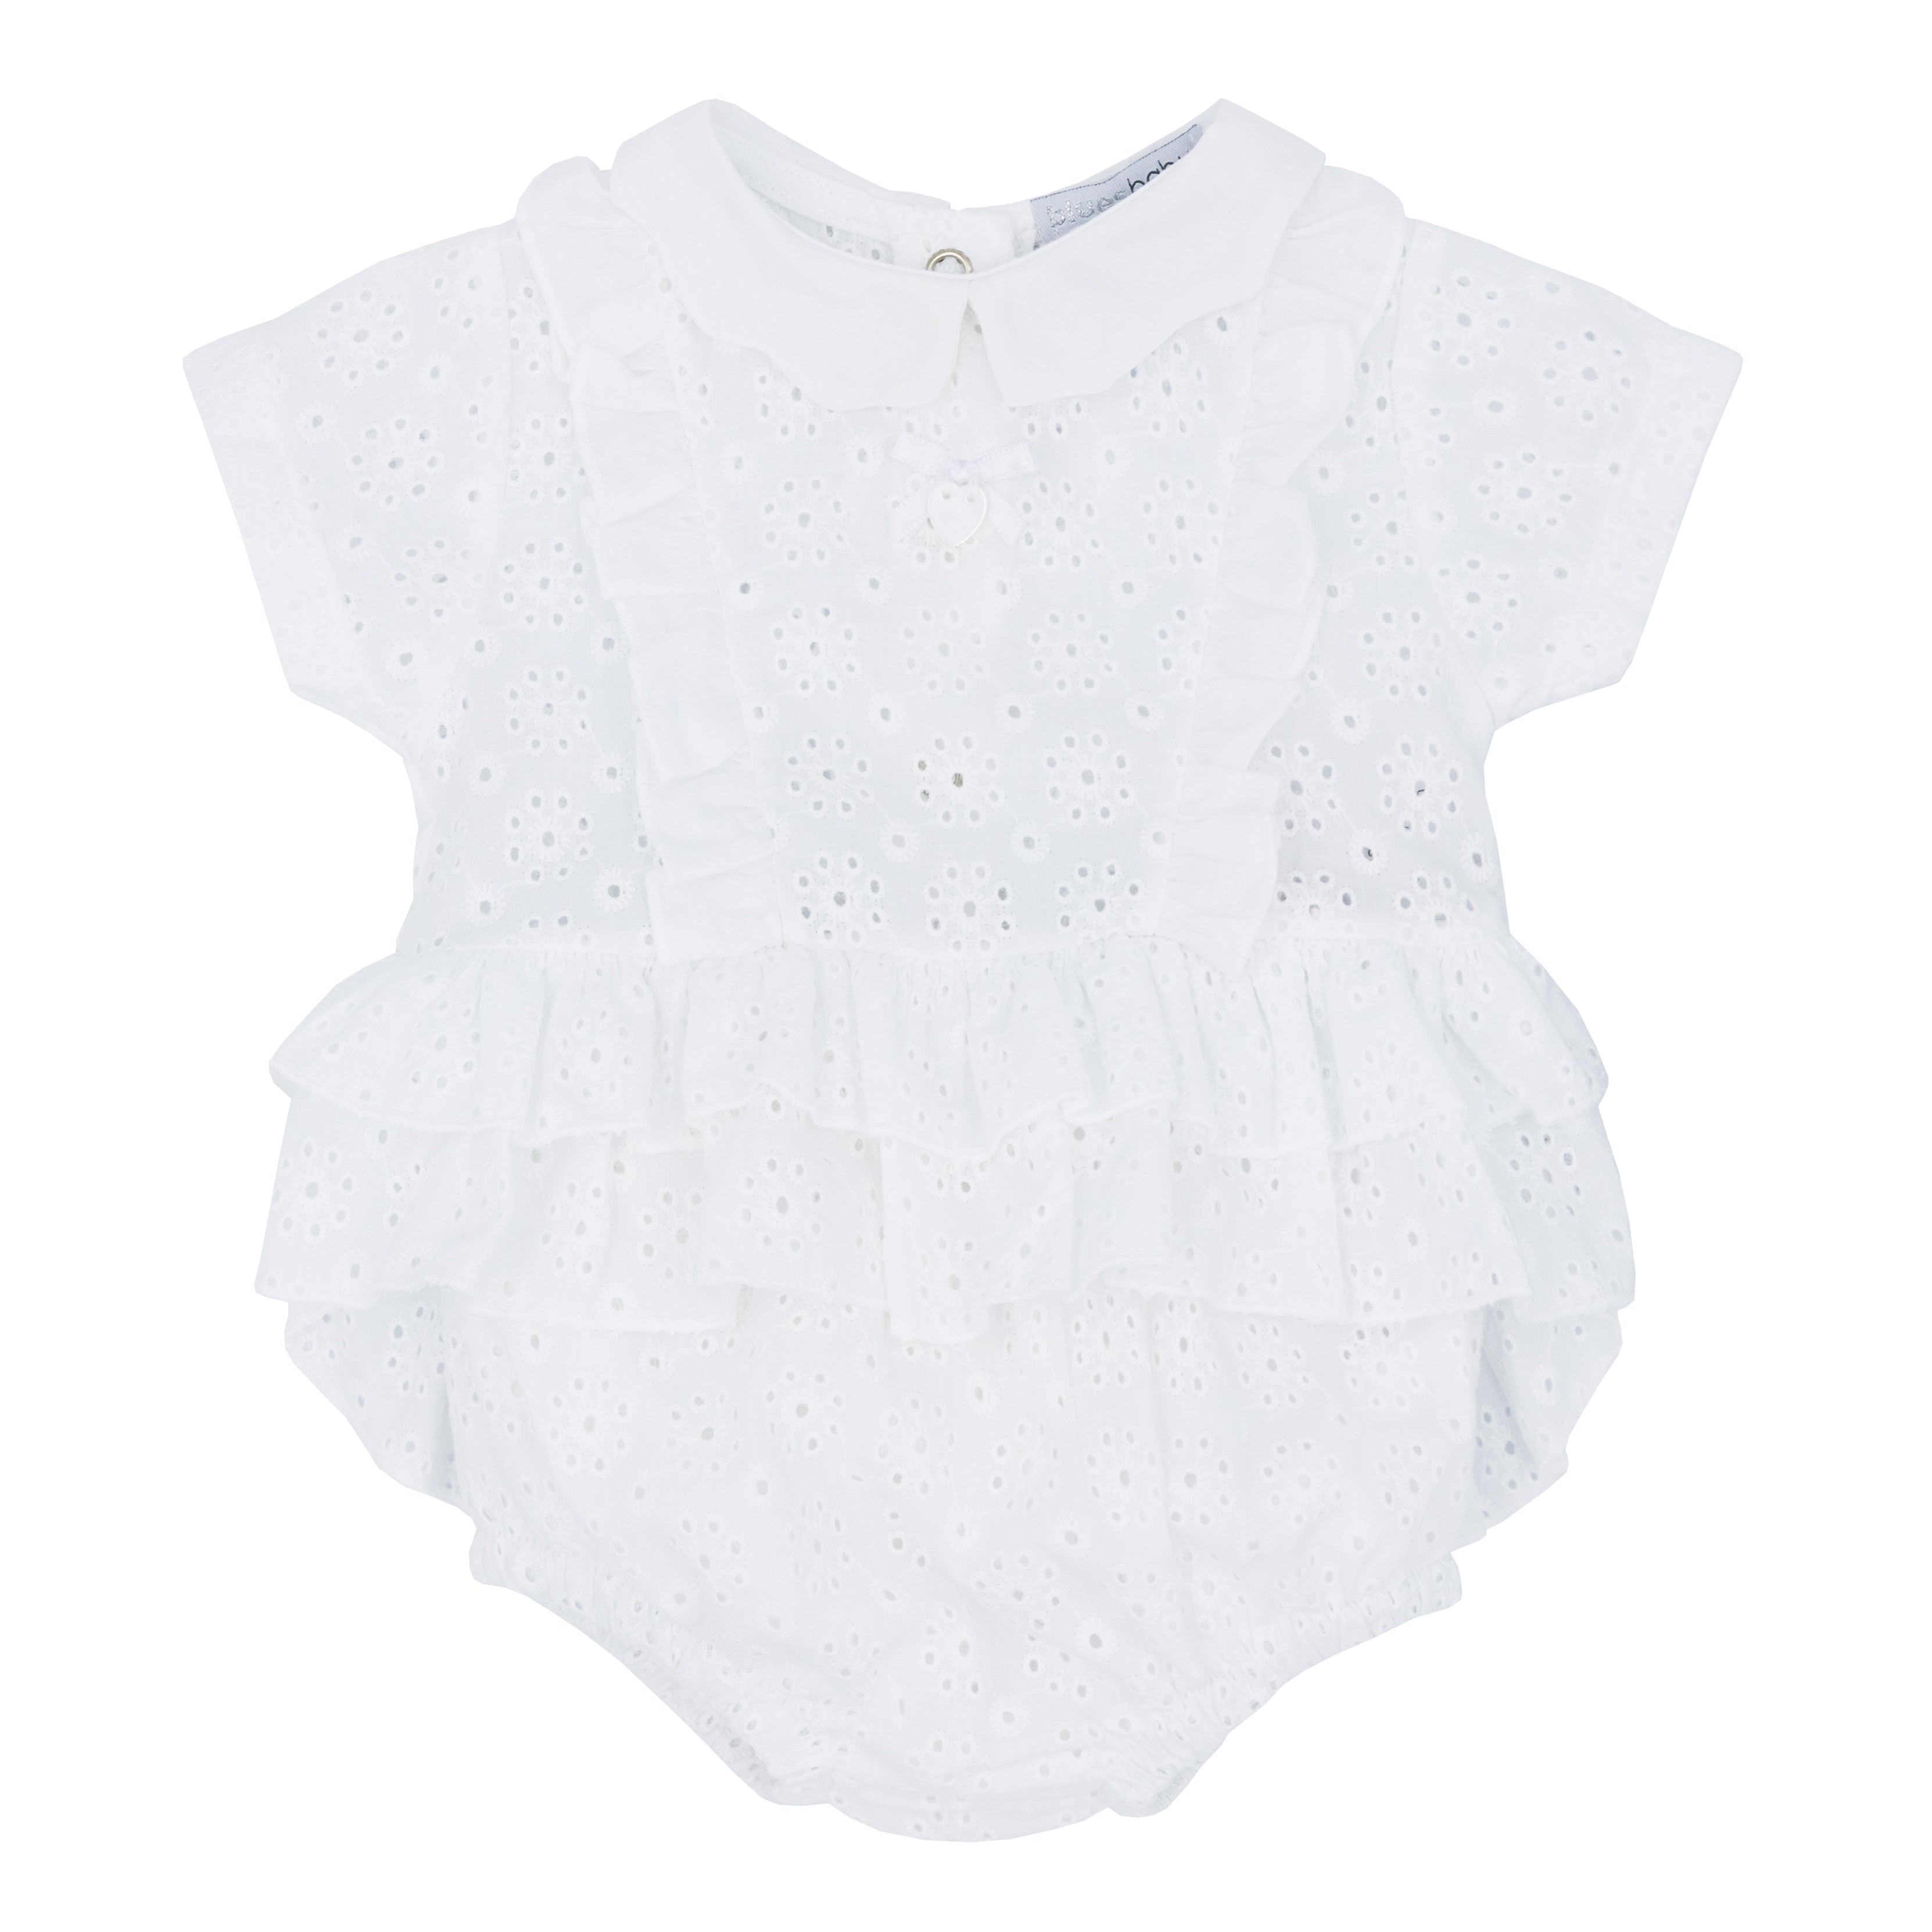 Girls broderie anglaise set with woven frill and jam pants